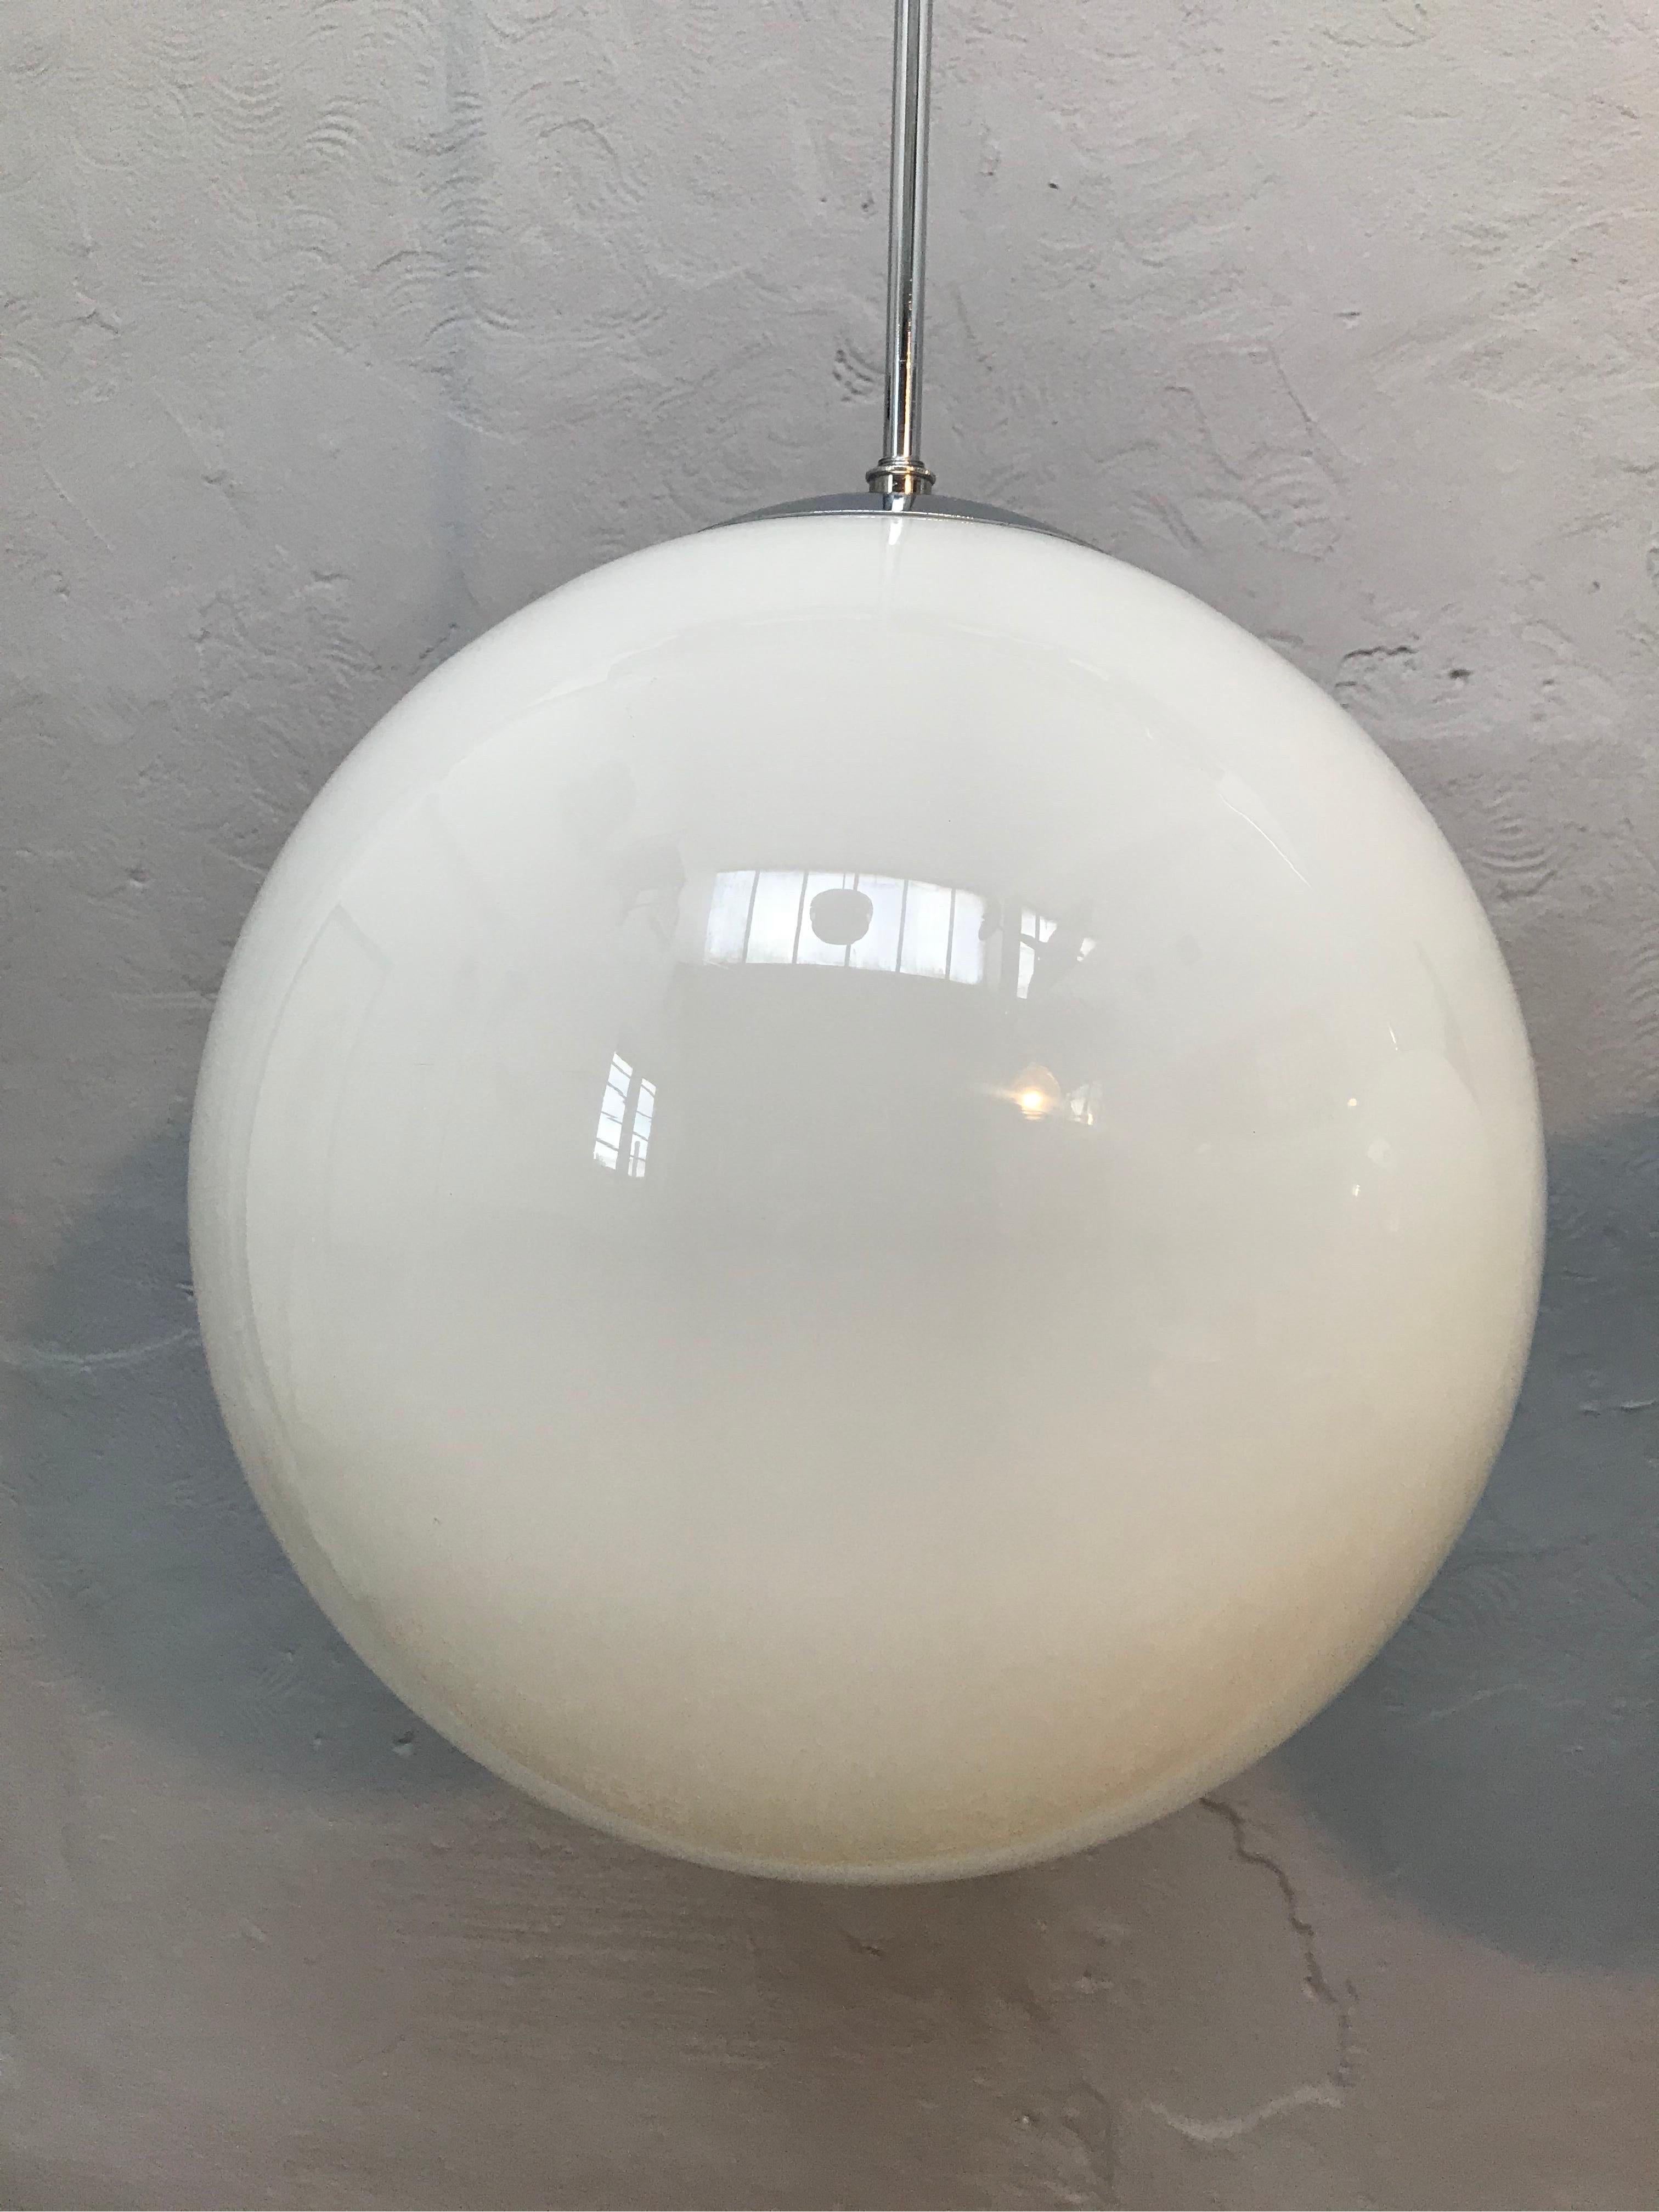 Large vintage Danish Vilhelm Lauritzen for Louis Poulsen opaline hand blown glass pendent chandeliers.
In original condition with new wiring and grounded.
Hanging on a 90cm long nickel plated copper pipe that can be shortened and rethreaded if so